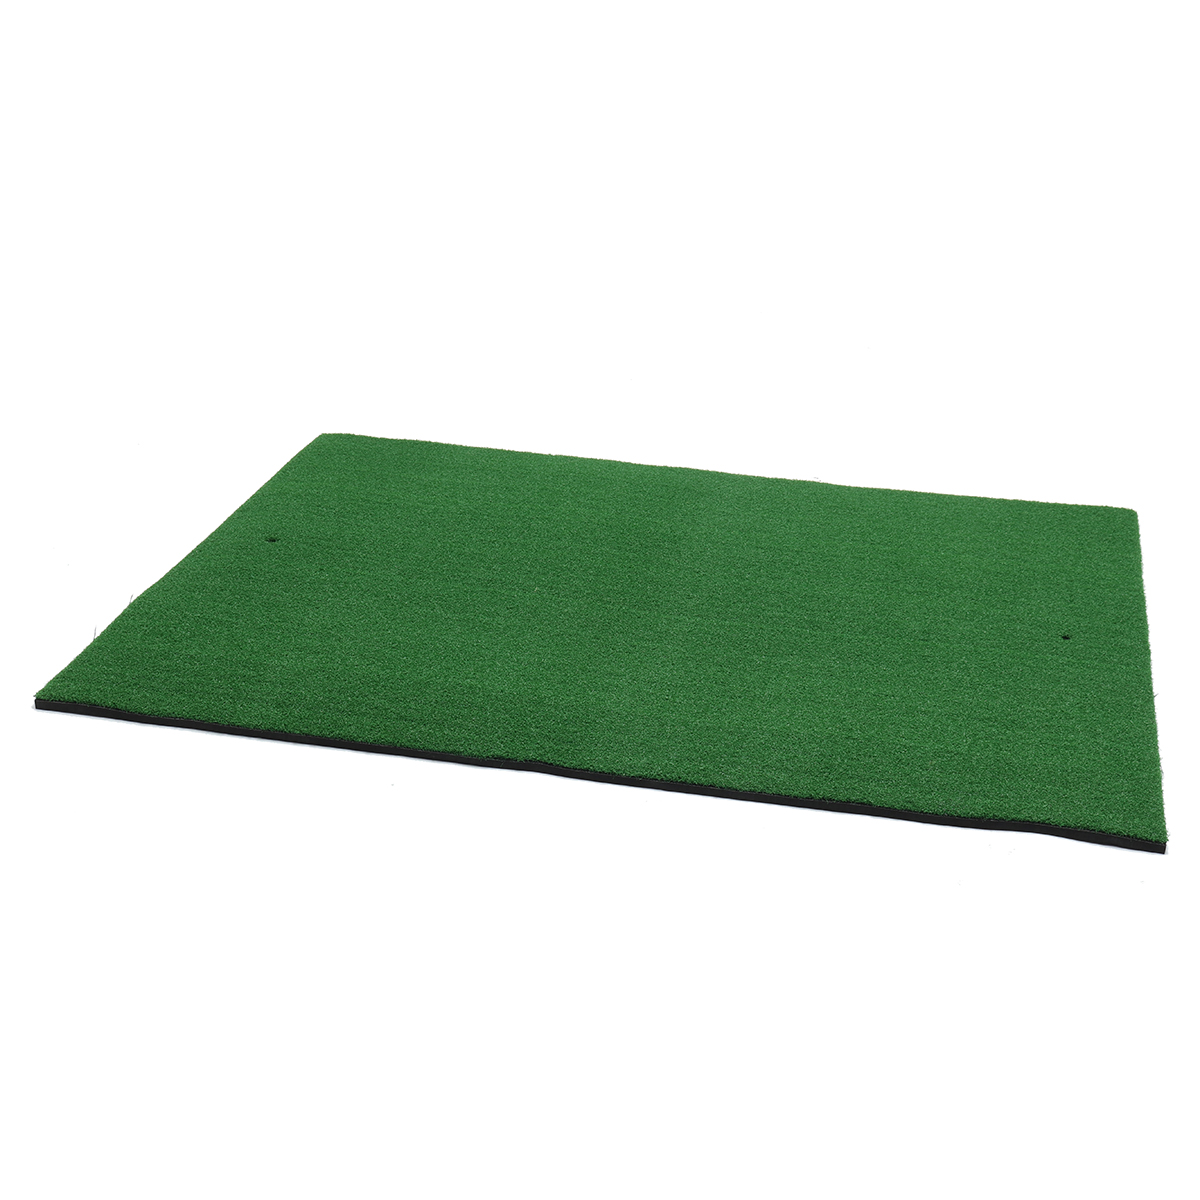 Indoor-Golf-Practice-Grass-Mat-Residential-Training-Hitting-Turf-Mat-With-Ball-amp-Tee-1550012